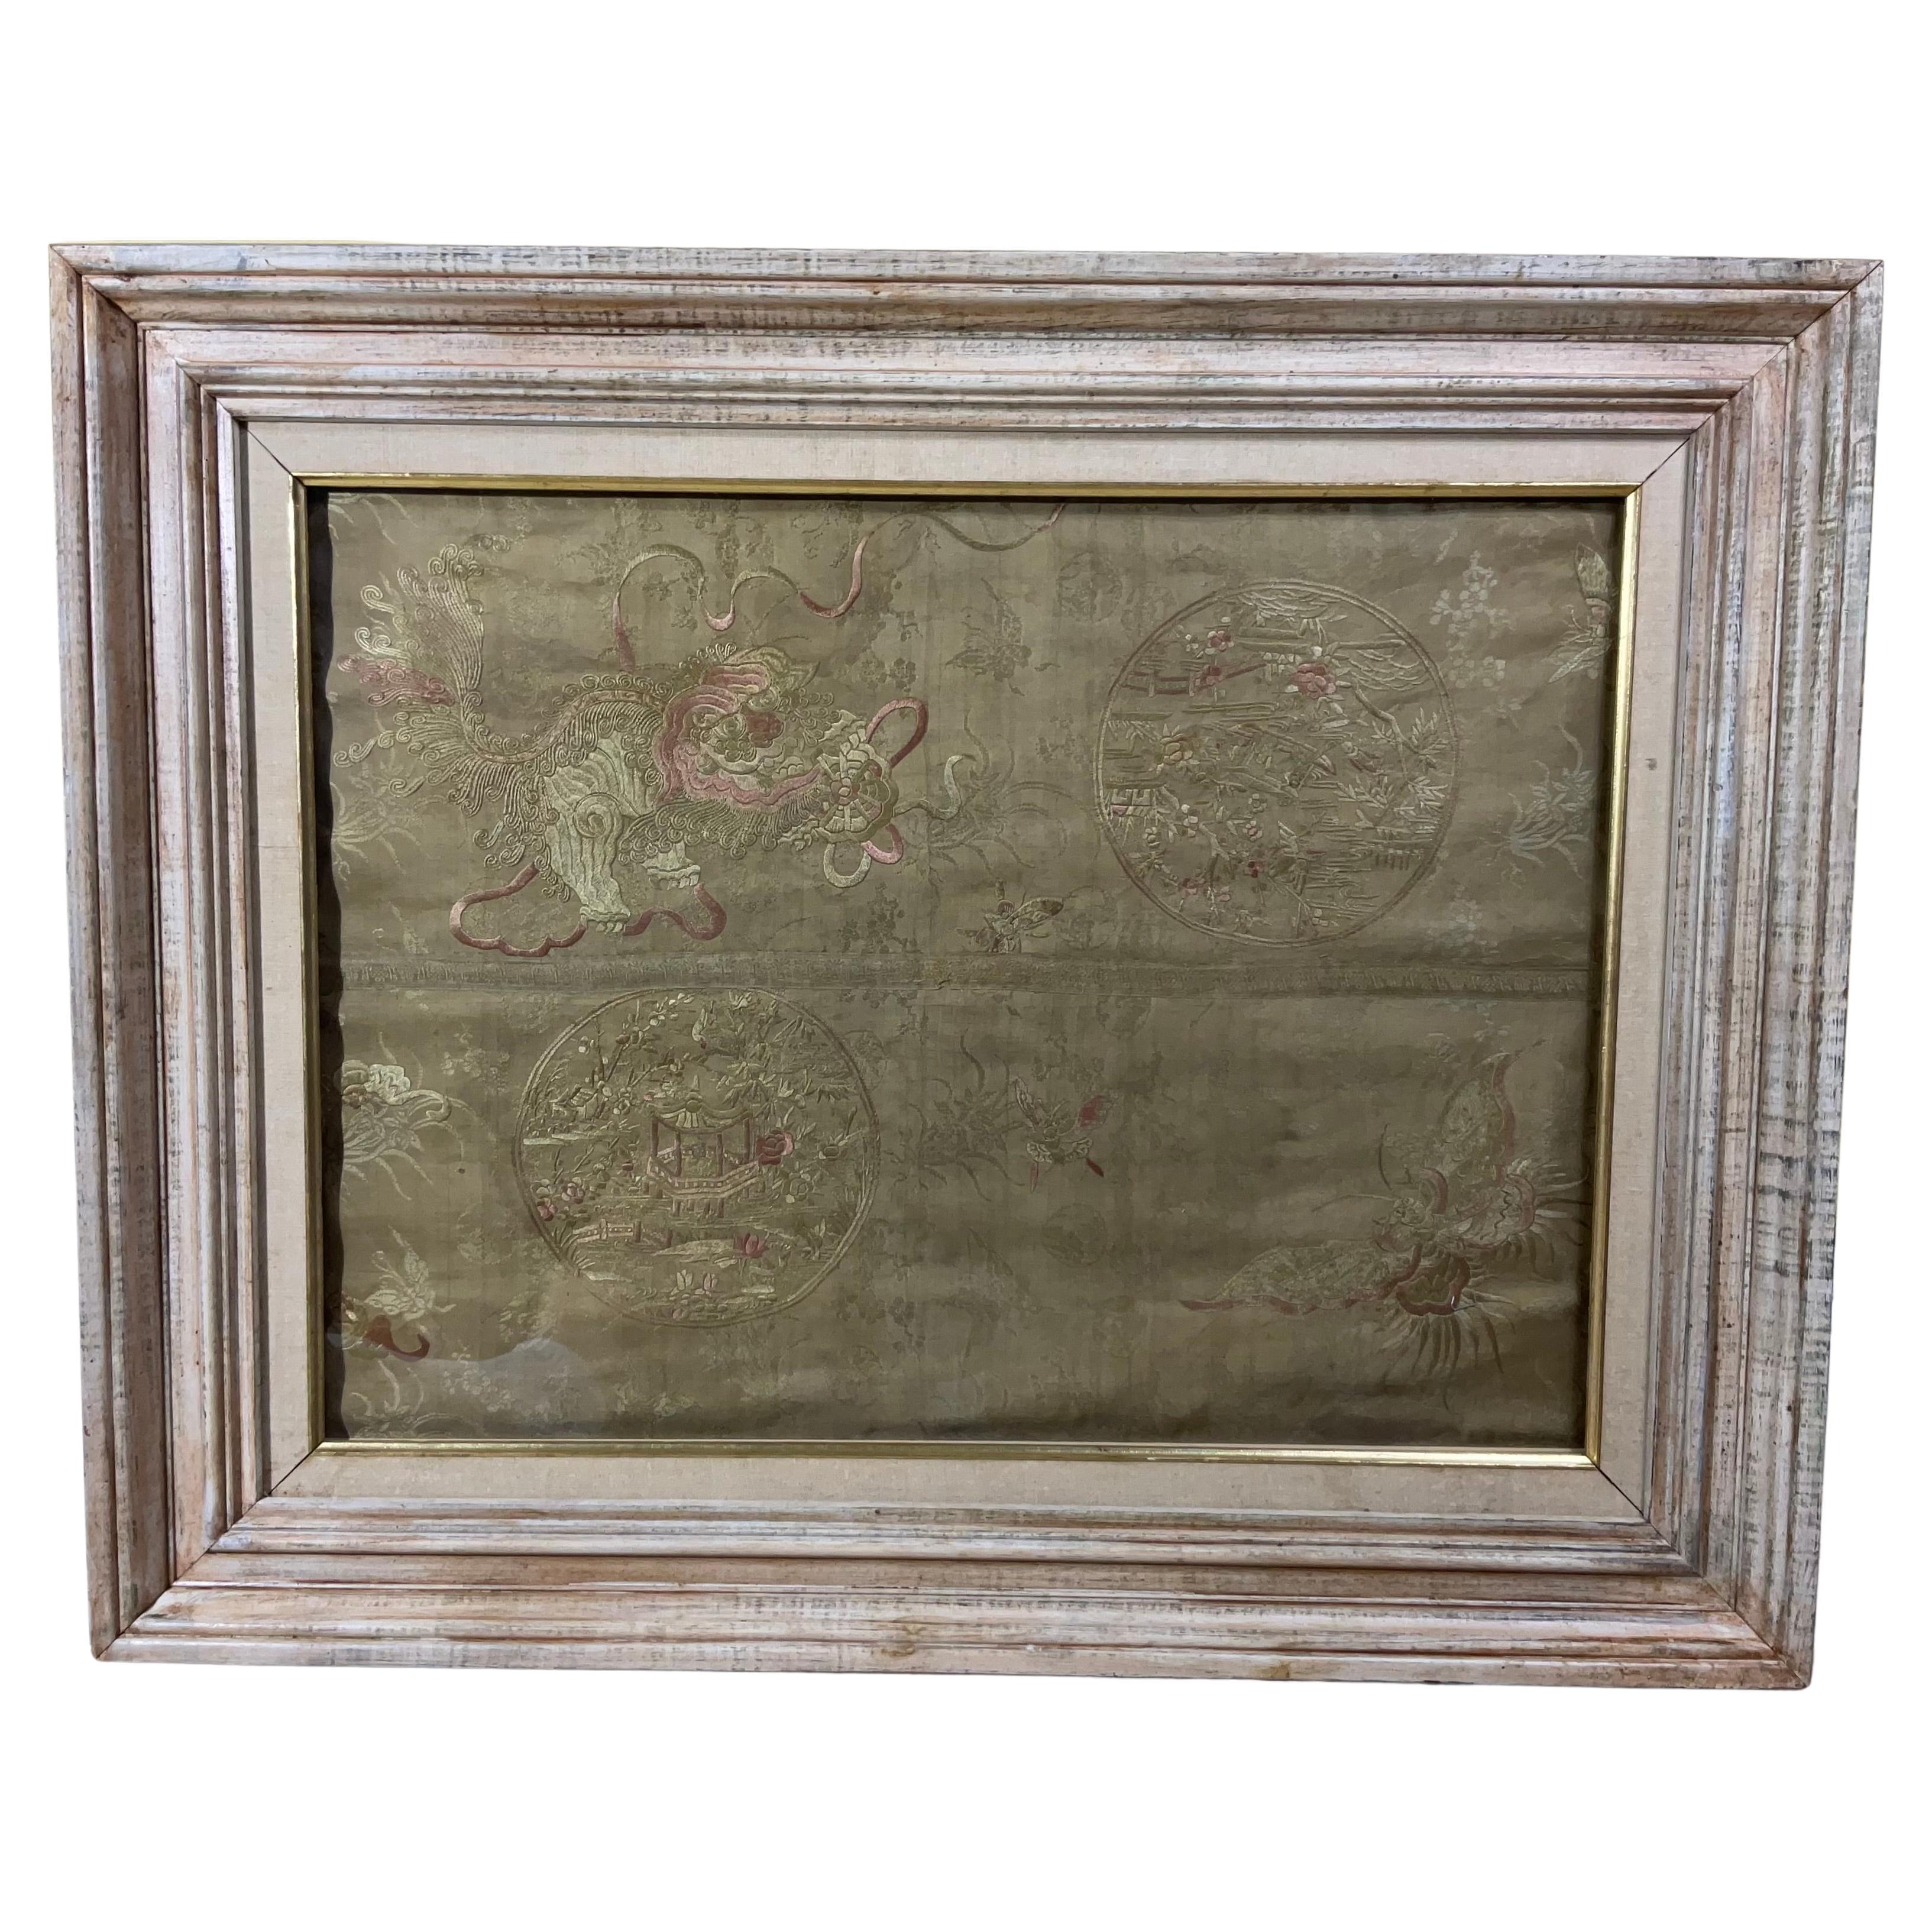 Chinese Dragon, Framed Silk Textile  Embroidery